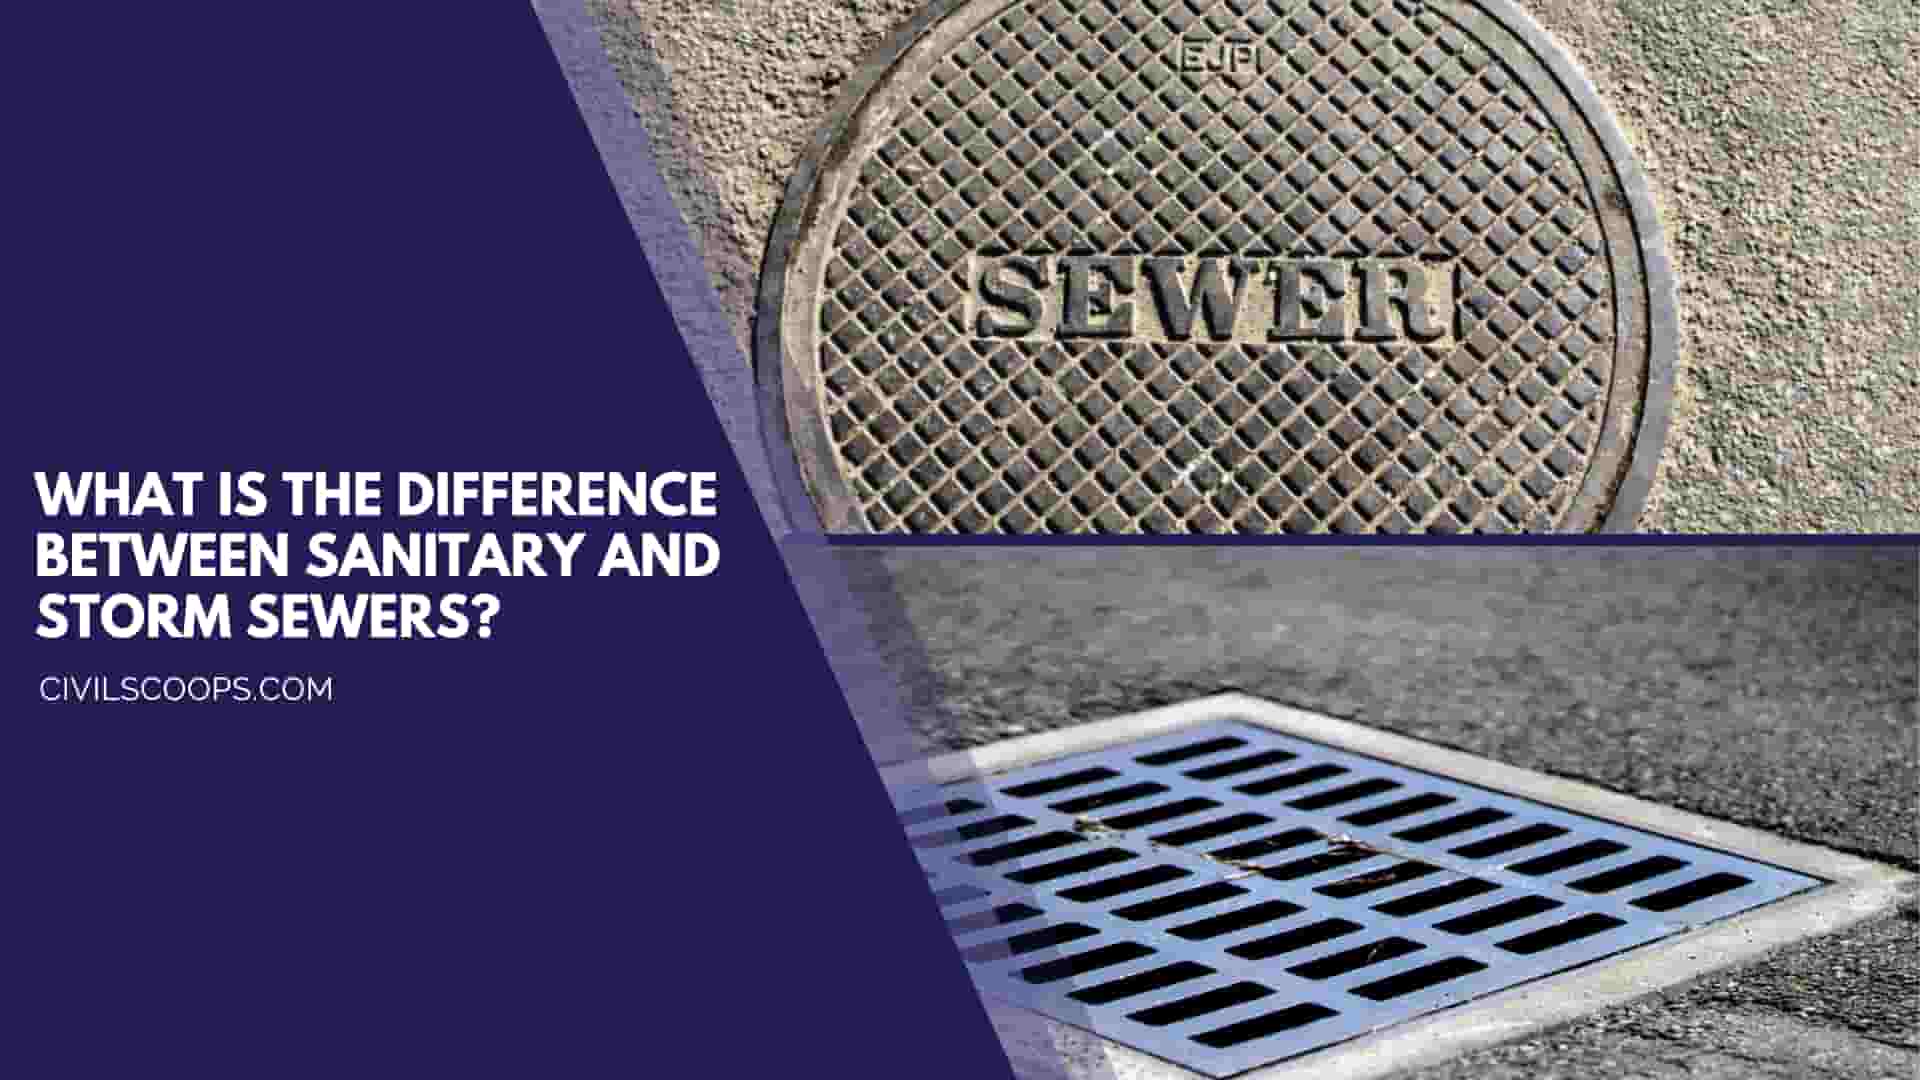 What Is Difference Between Sanitary and Storm Sewers